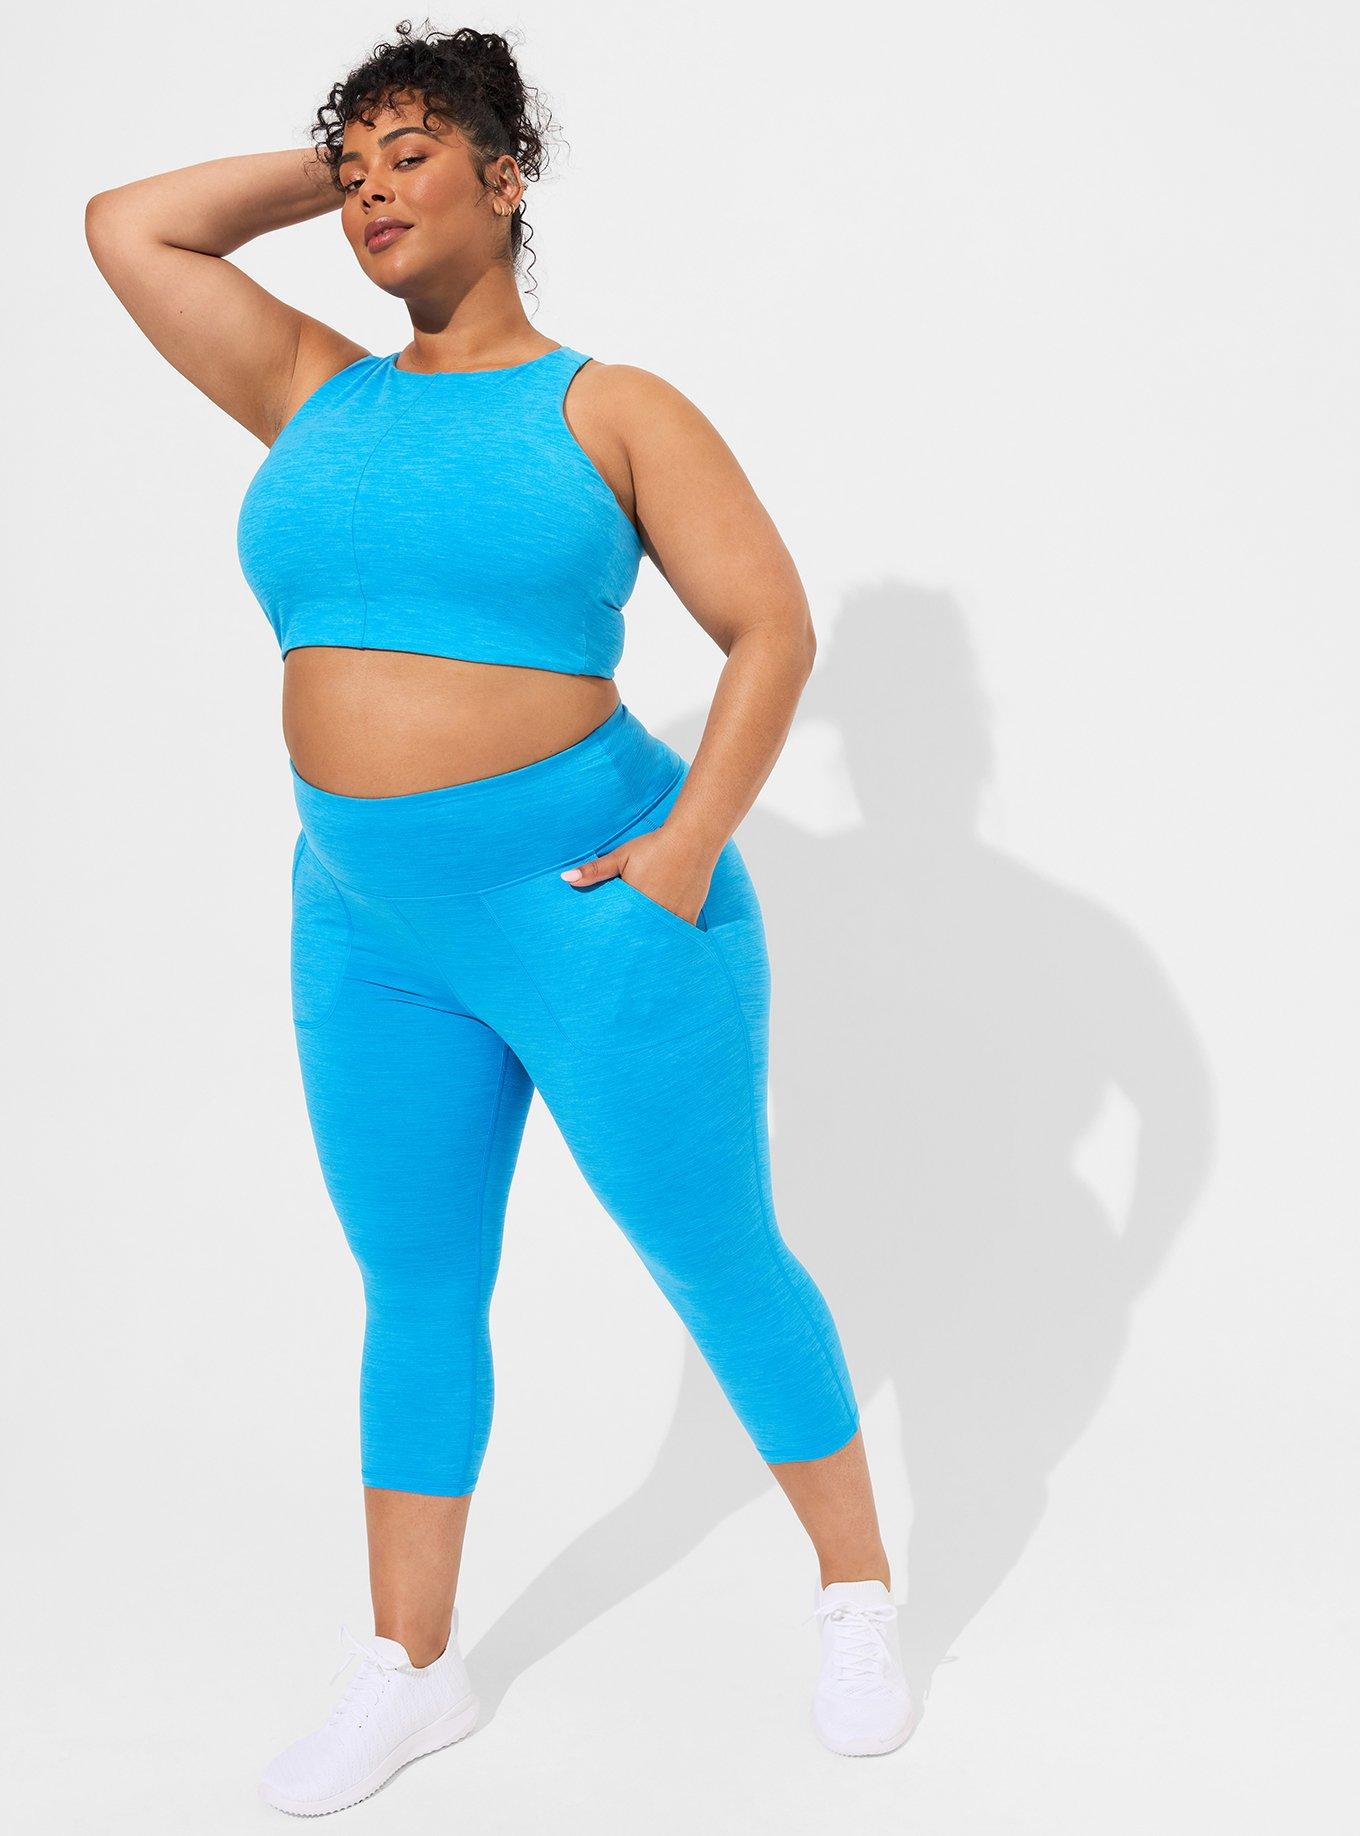 Buttery Smooth Summer Campers Plus Size Leggings - 3X-5X